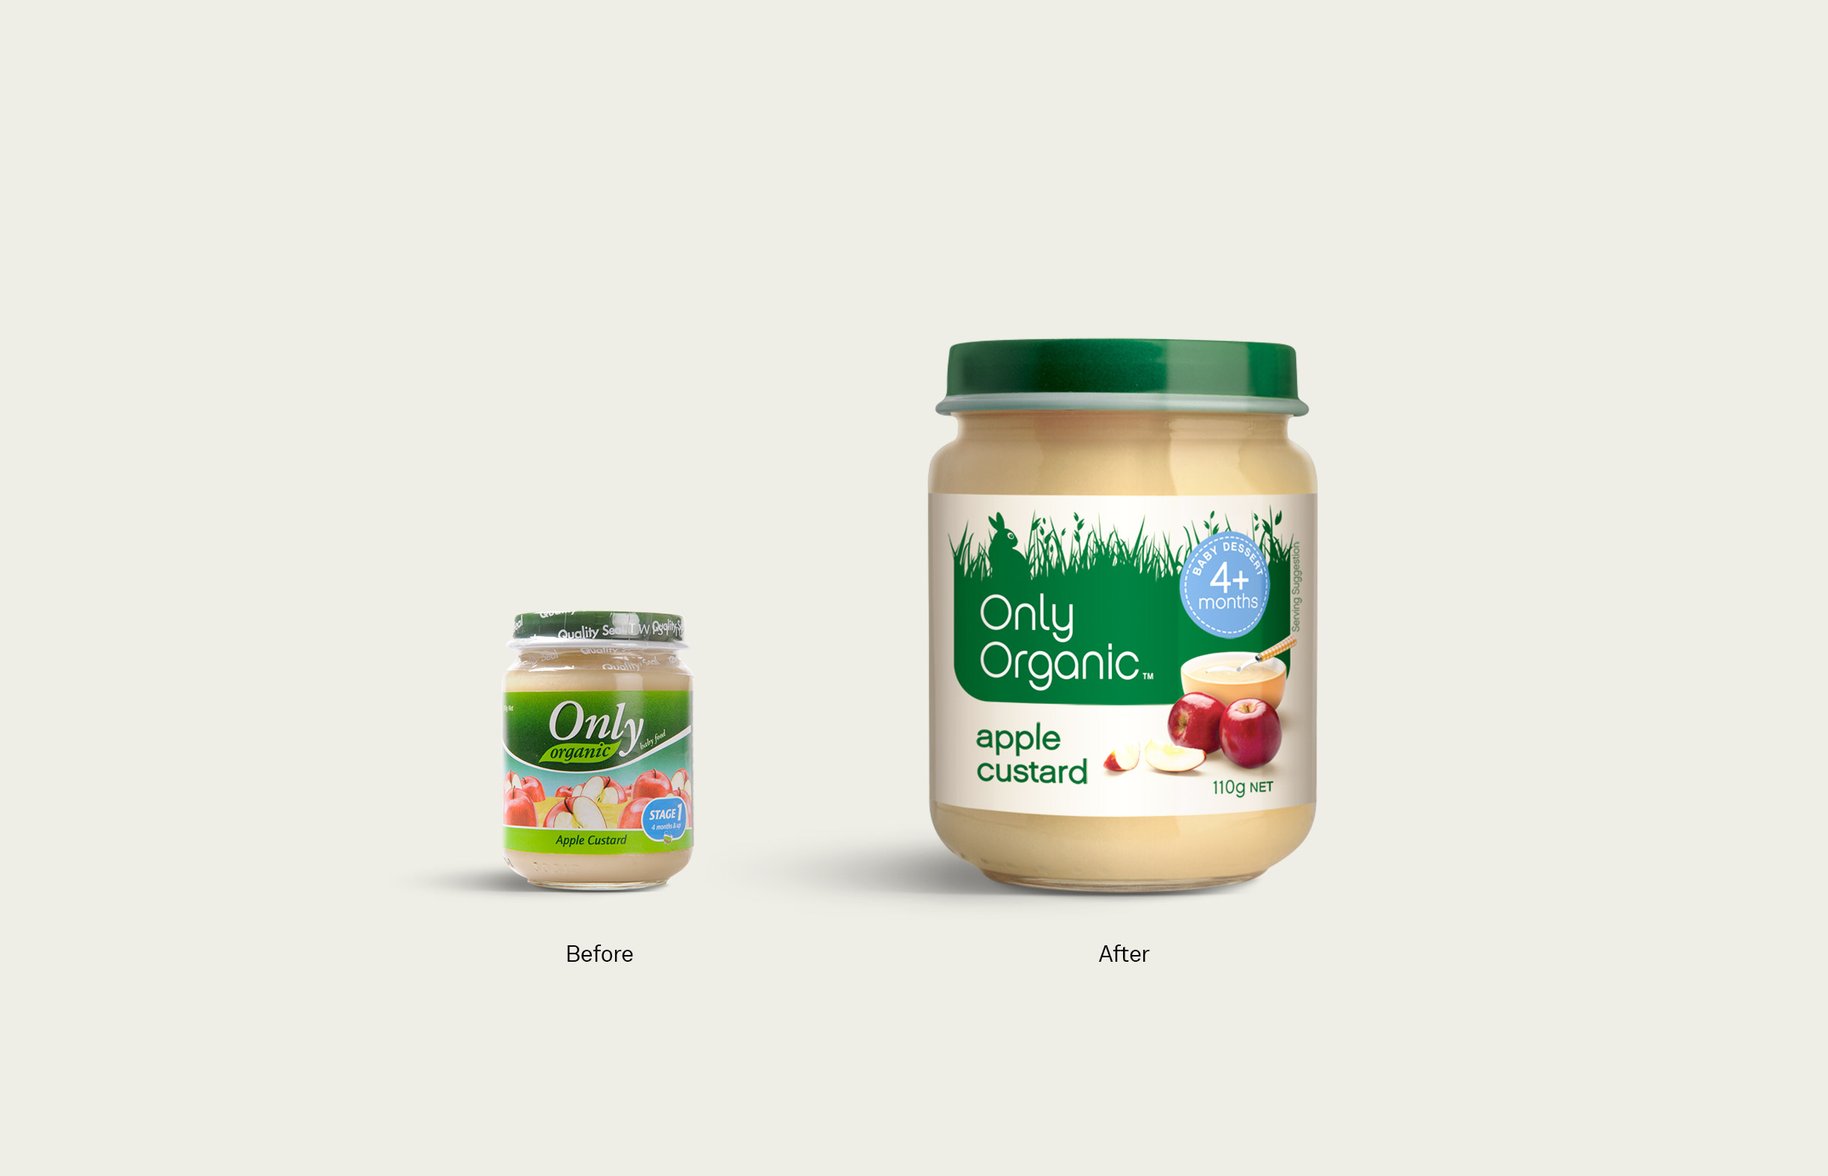 Only Organic baby food jar packaging before and after